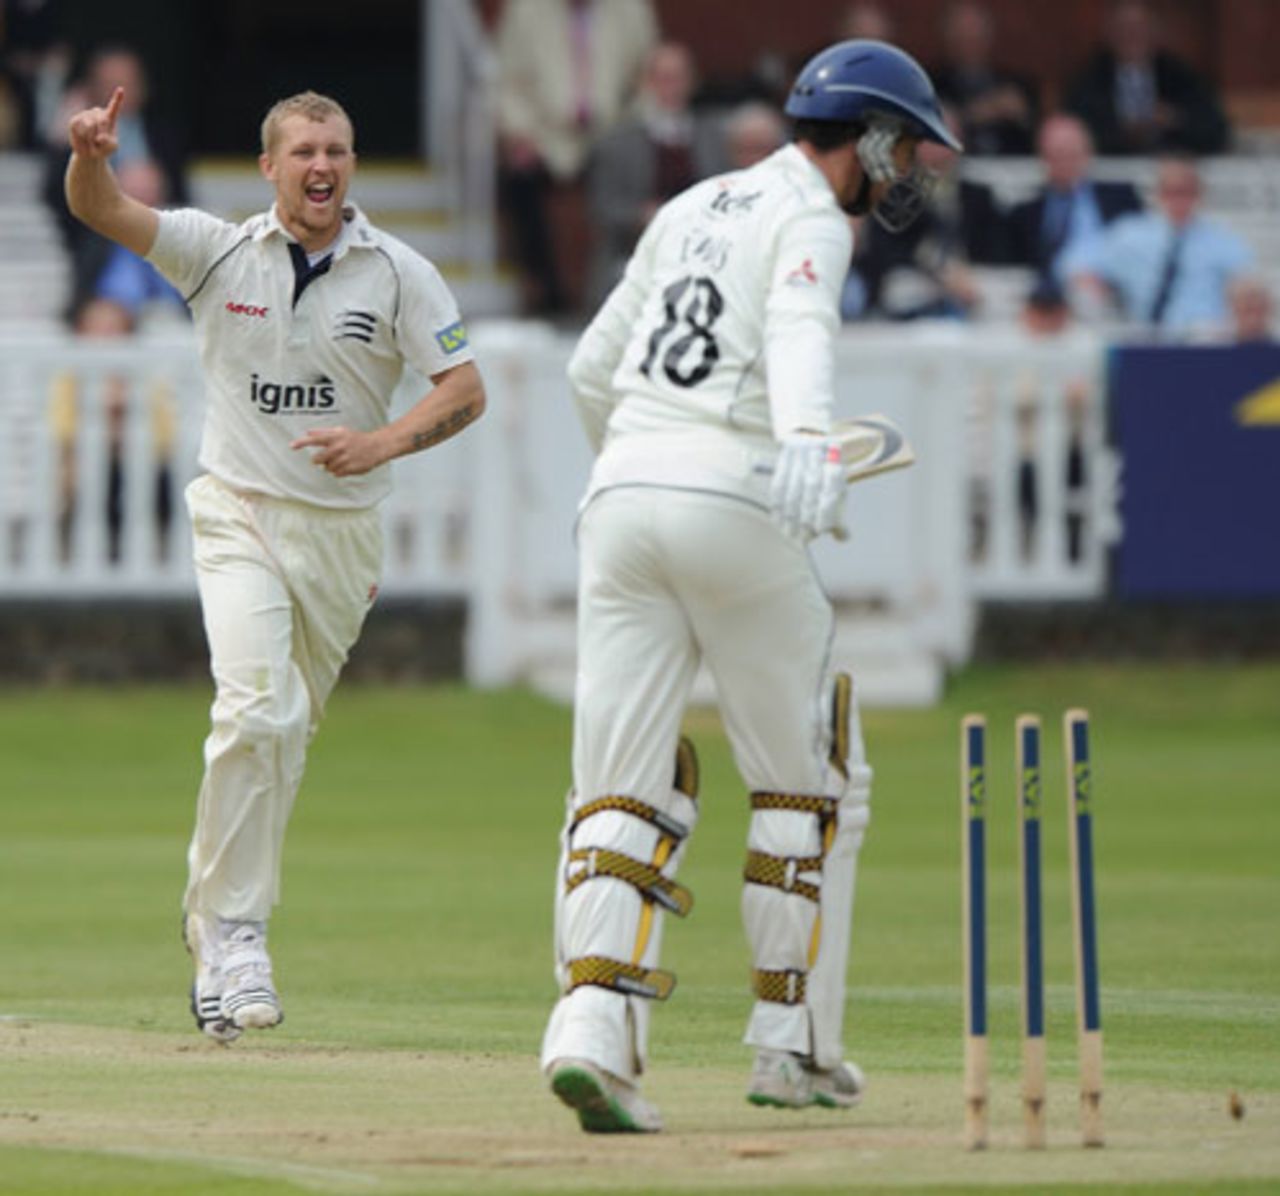 Gareth Berg is delighted to see the end of Jon Lewis, who clubbed 43 to give Gloucestershire a first-innings lead, Middlesex v Gloucestershire, County Championship, Division Two, Lord's, April 29, 2010